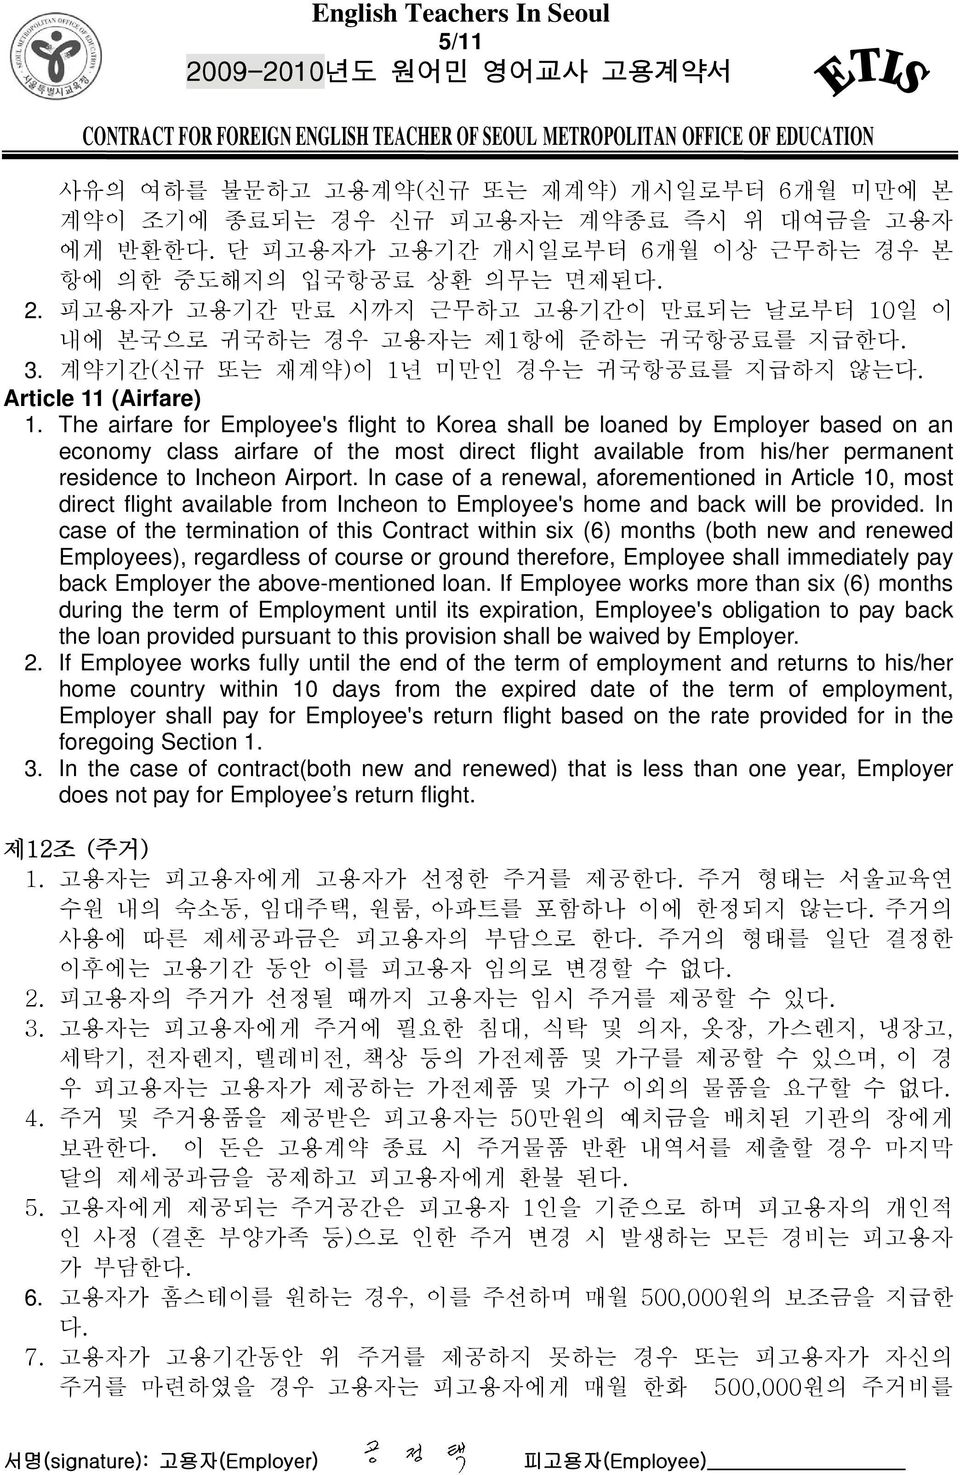 The airfare for Employee's flight to Korea shall be loaned by Employer based on an economy class airfare of the most direct flight available from his/her permanent residence to Incheon Airport.